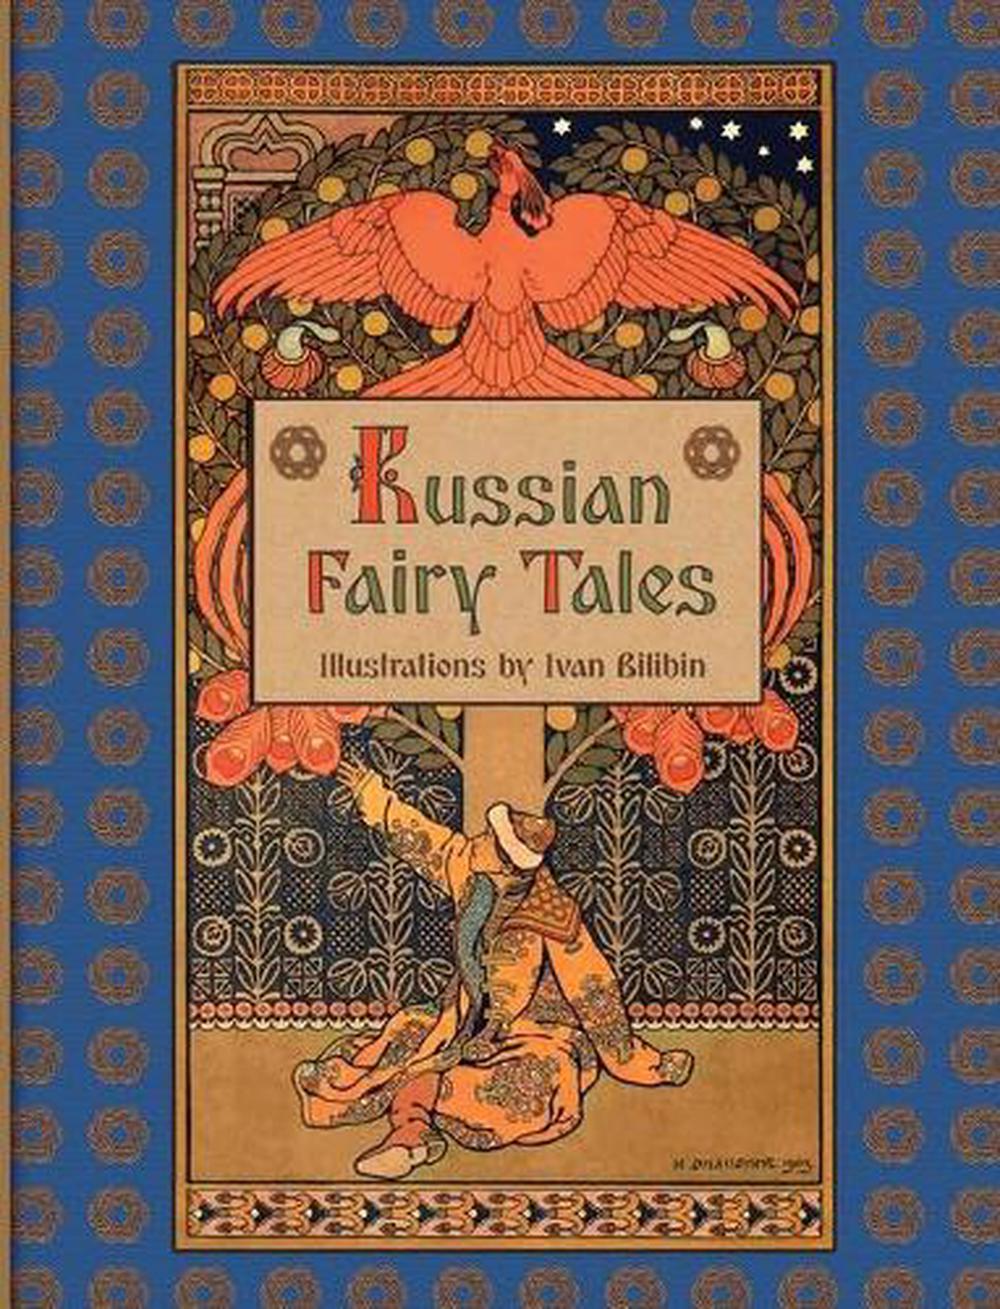 Russian Fairy Tales By Alexander Afanasyev English Hardcover Book Free Shippin 9781909115590